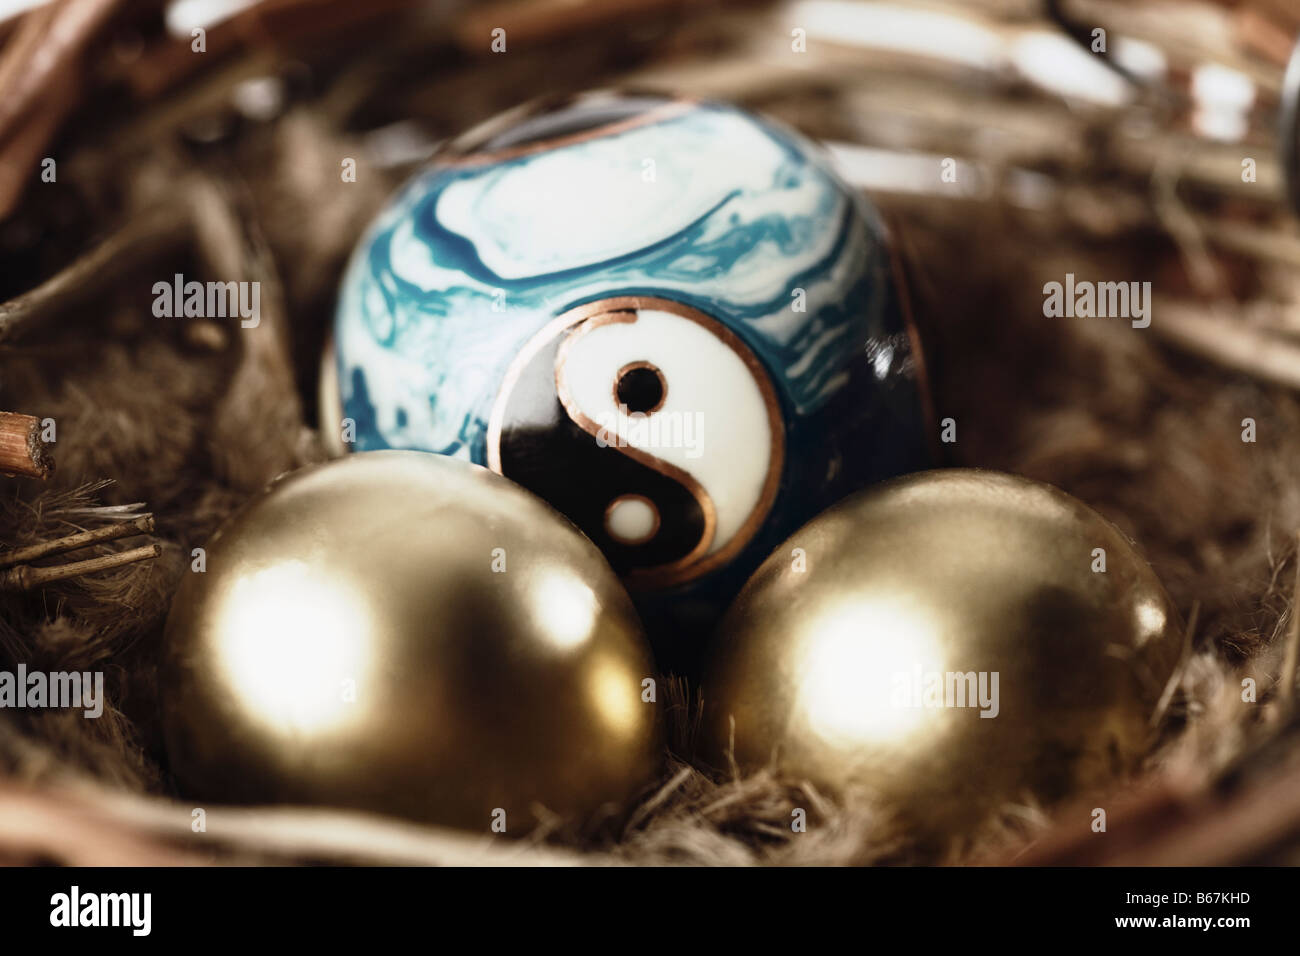 Close-up of golden eggs with a yin yang ball in a bird's nest Stock Photo